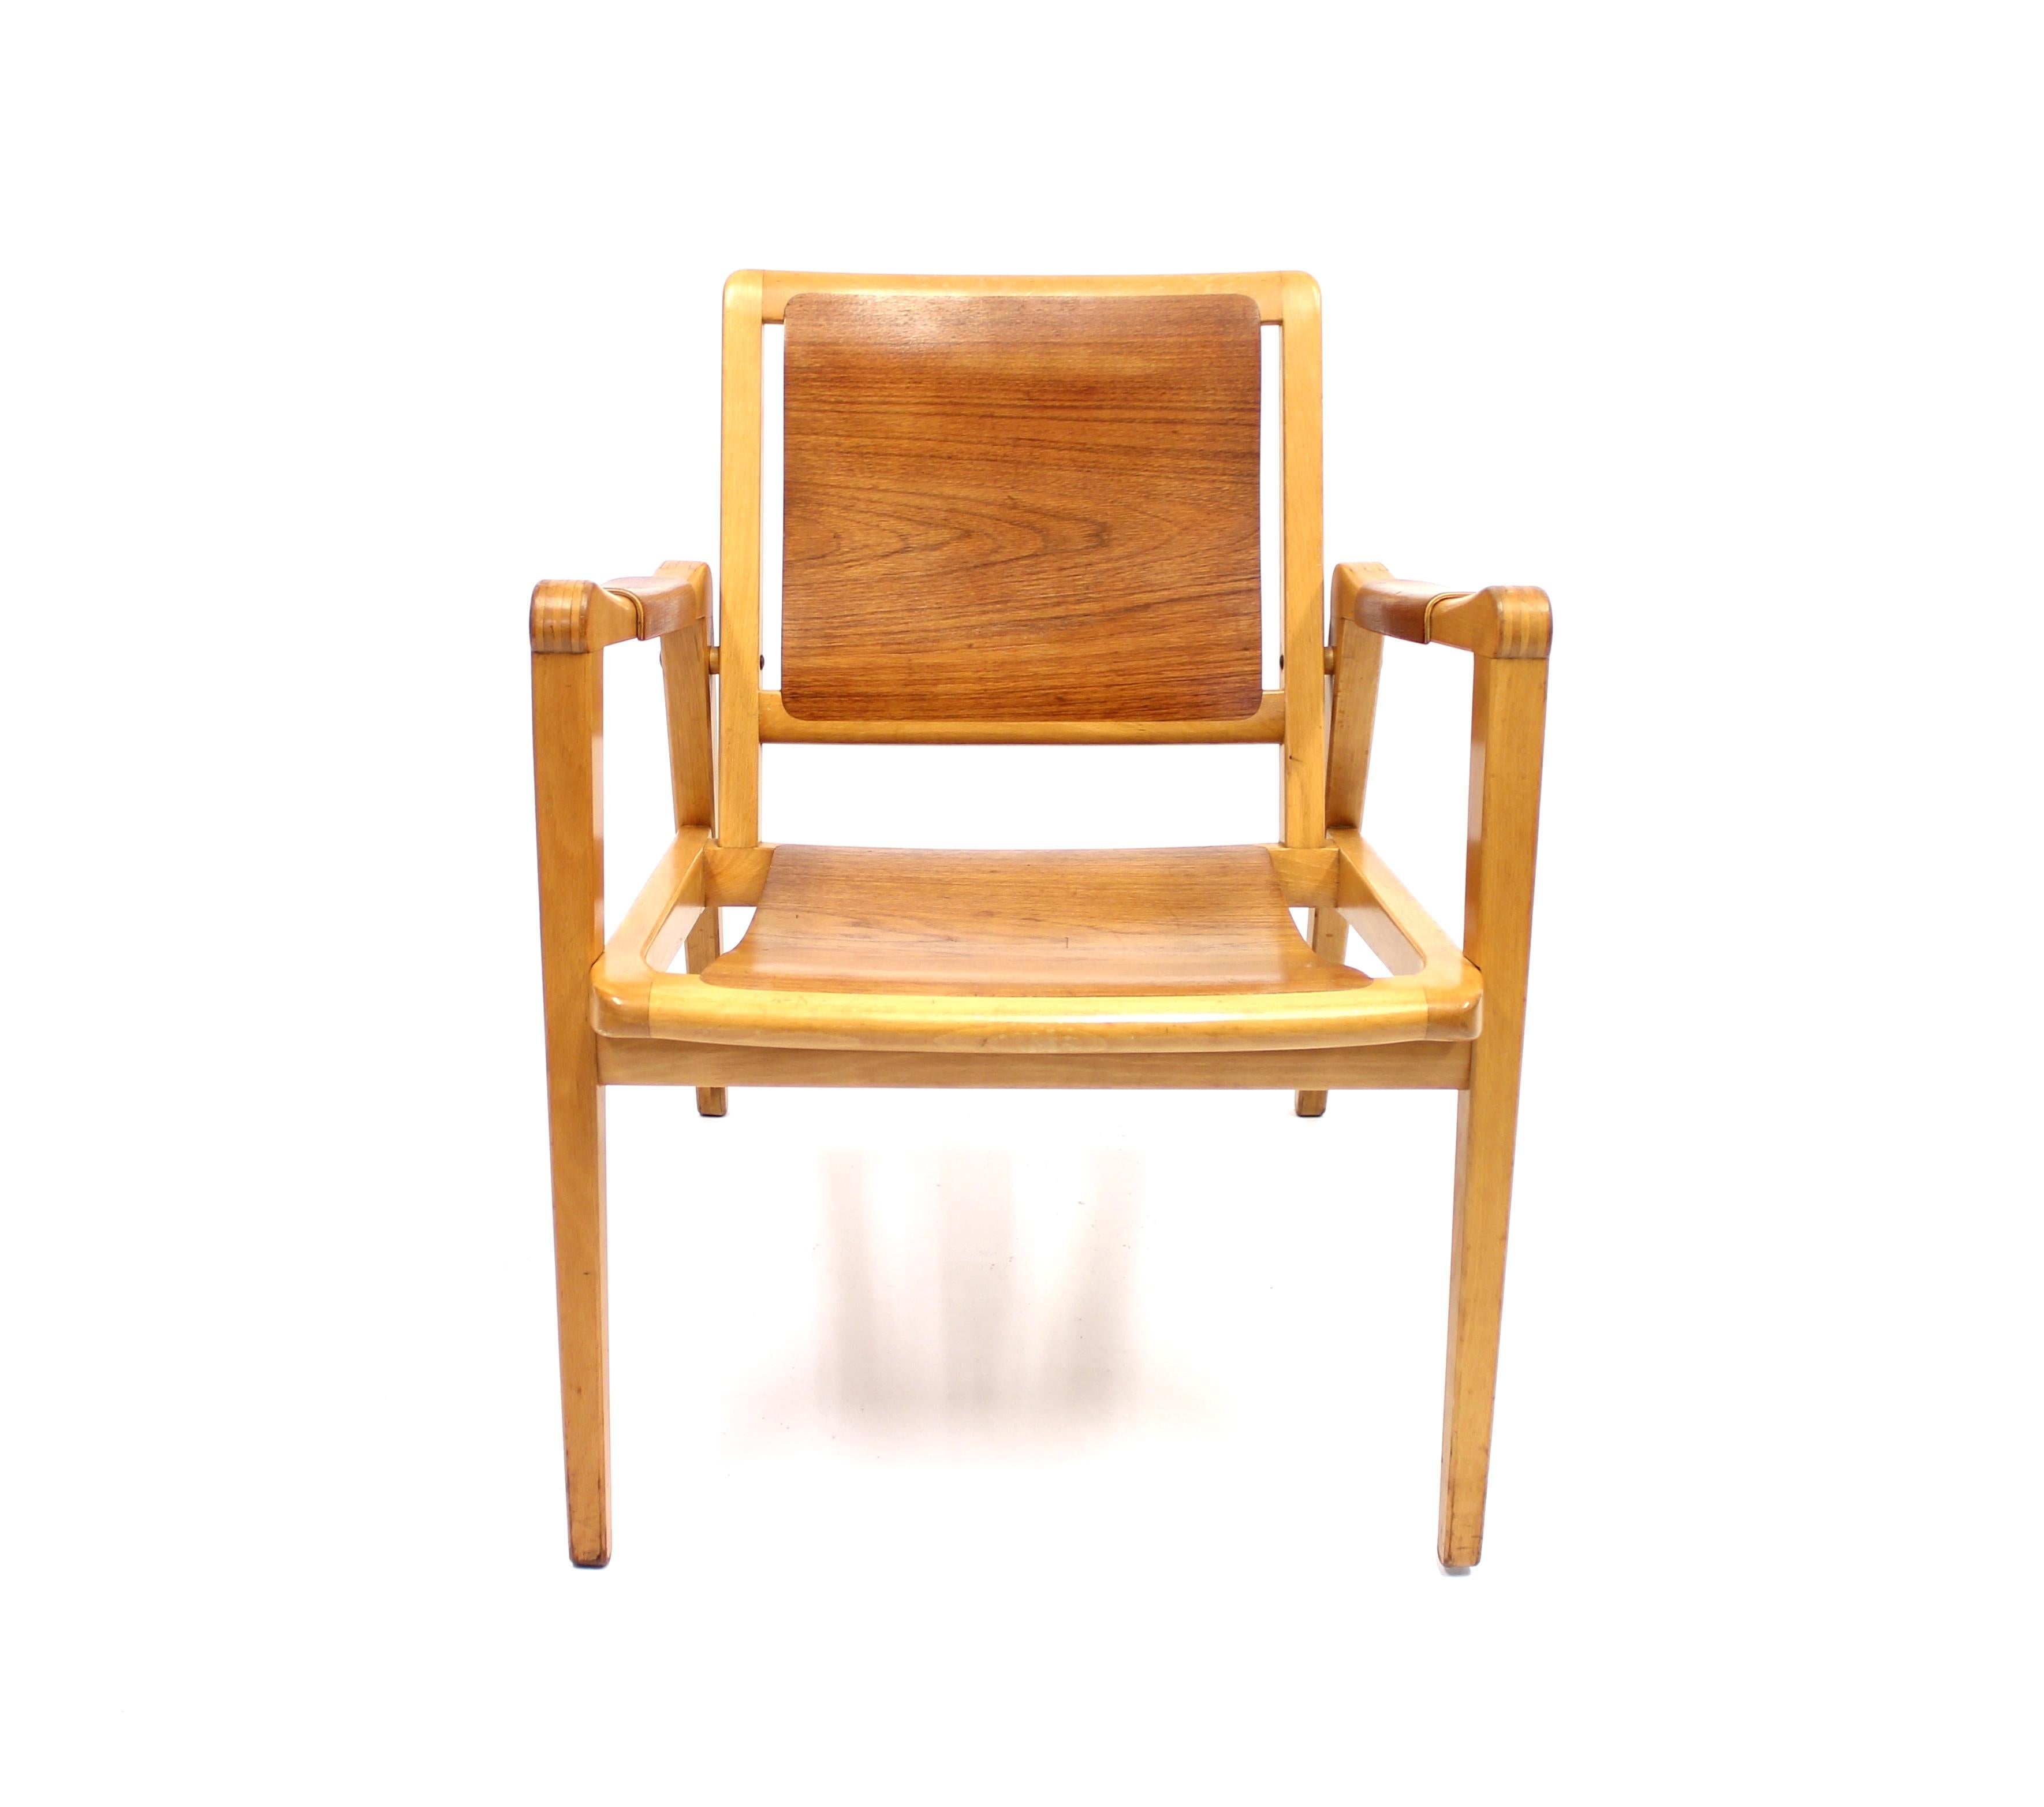 Wonderful midcentury arm chair by Axel Larsson for Bodafors that displays a nice way for the dark teak and the blond beech to coexist. Very good condition with minor ware consistent with age and use.